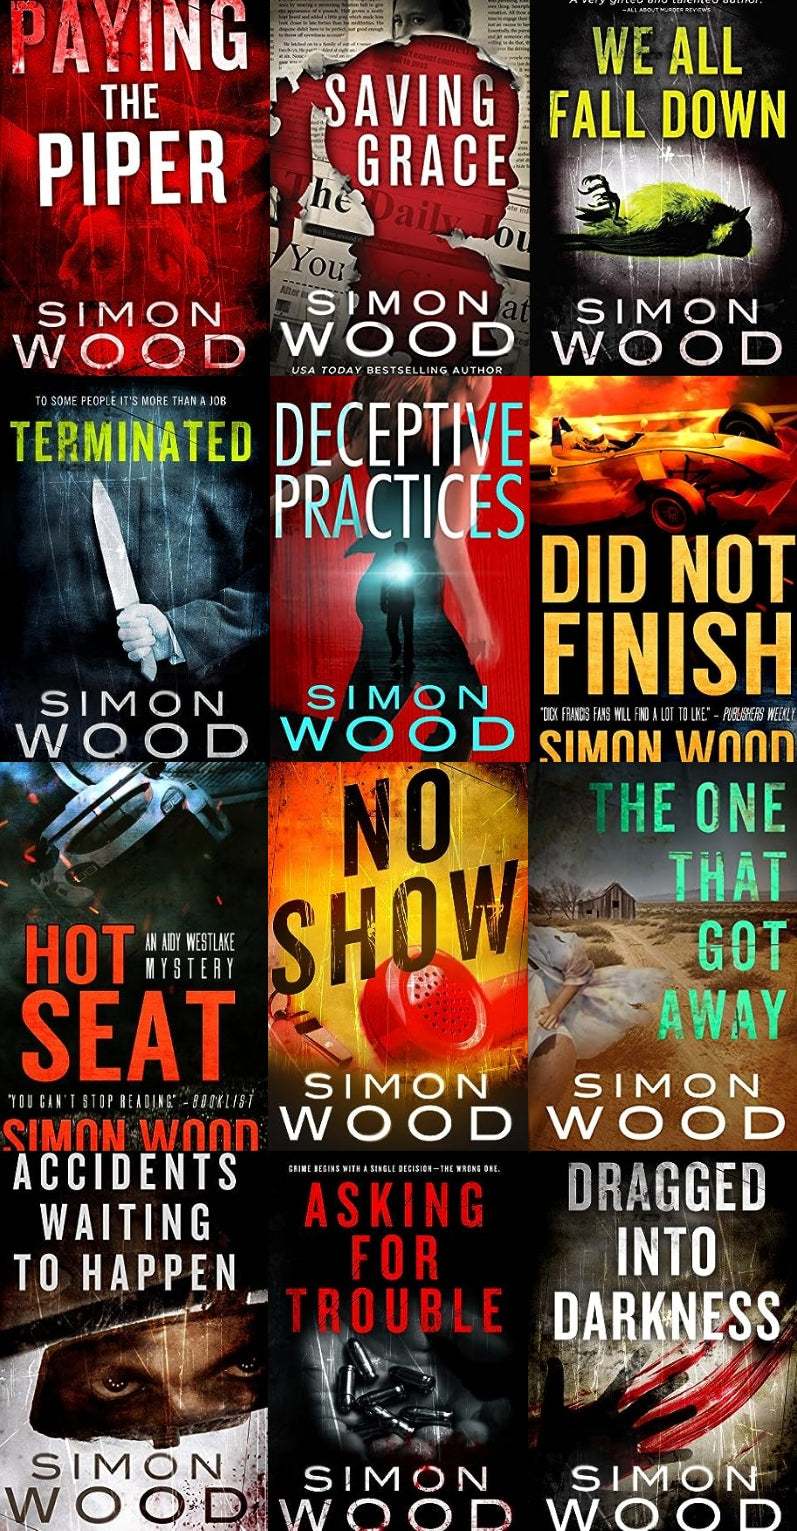 The Bay Area Quartet Series & more by Simon Wood ~ 12 MP3 AUDIOBOOK COLLECTION